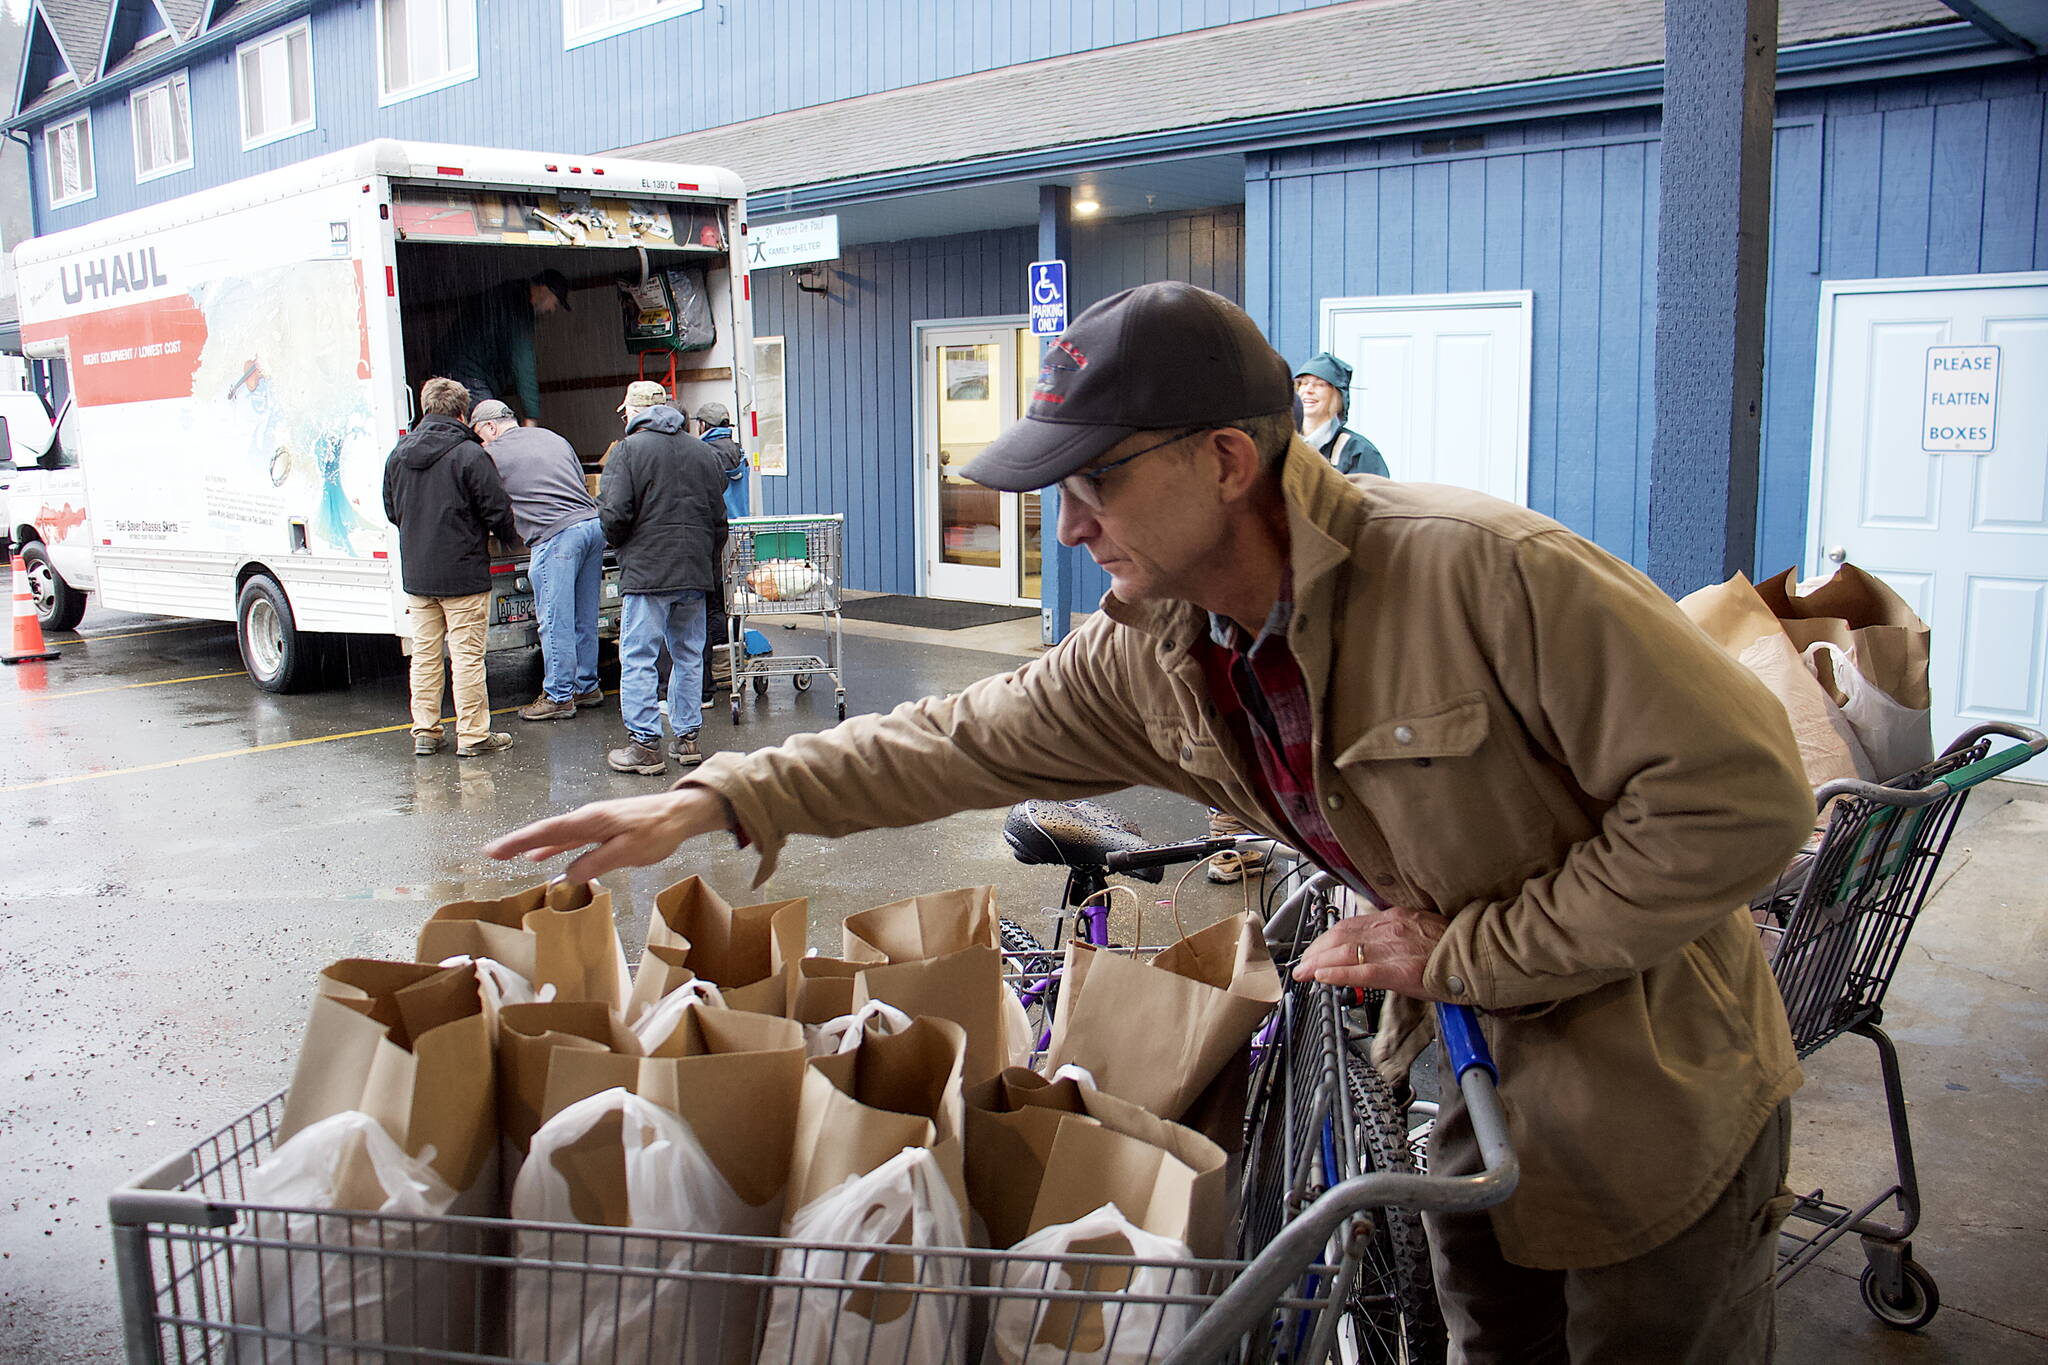 Joe Pagenkopf counts bags of food in a shopping cart at the St. Vincent de Paul Juneau complex on Saturday morning before heading out to deliver Thanksgiving food baskets to local residents. He said it is his first time making such deliveries, which he was motivated to get after getting help when his home was nearly destroyed by the record flooding of Suicide Basin earlier this year. (Mark Sabbatini / Juneau Empire)